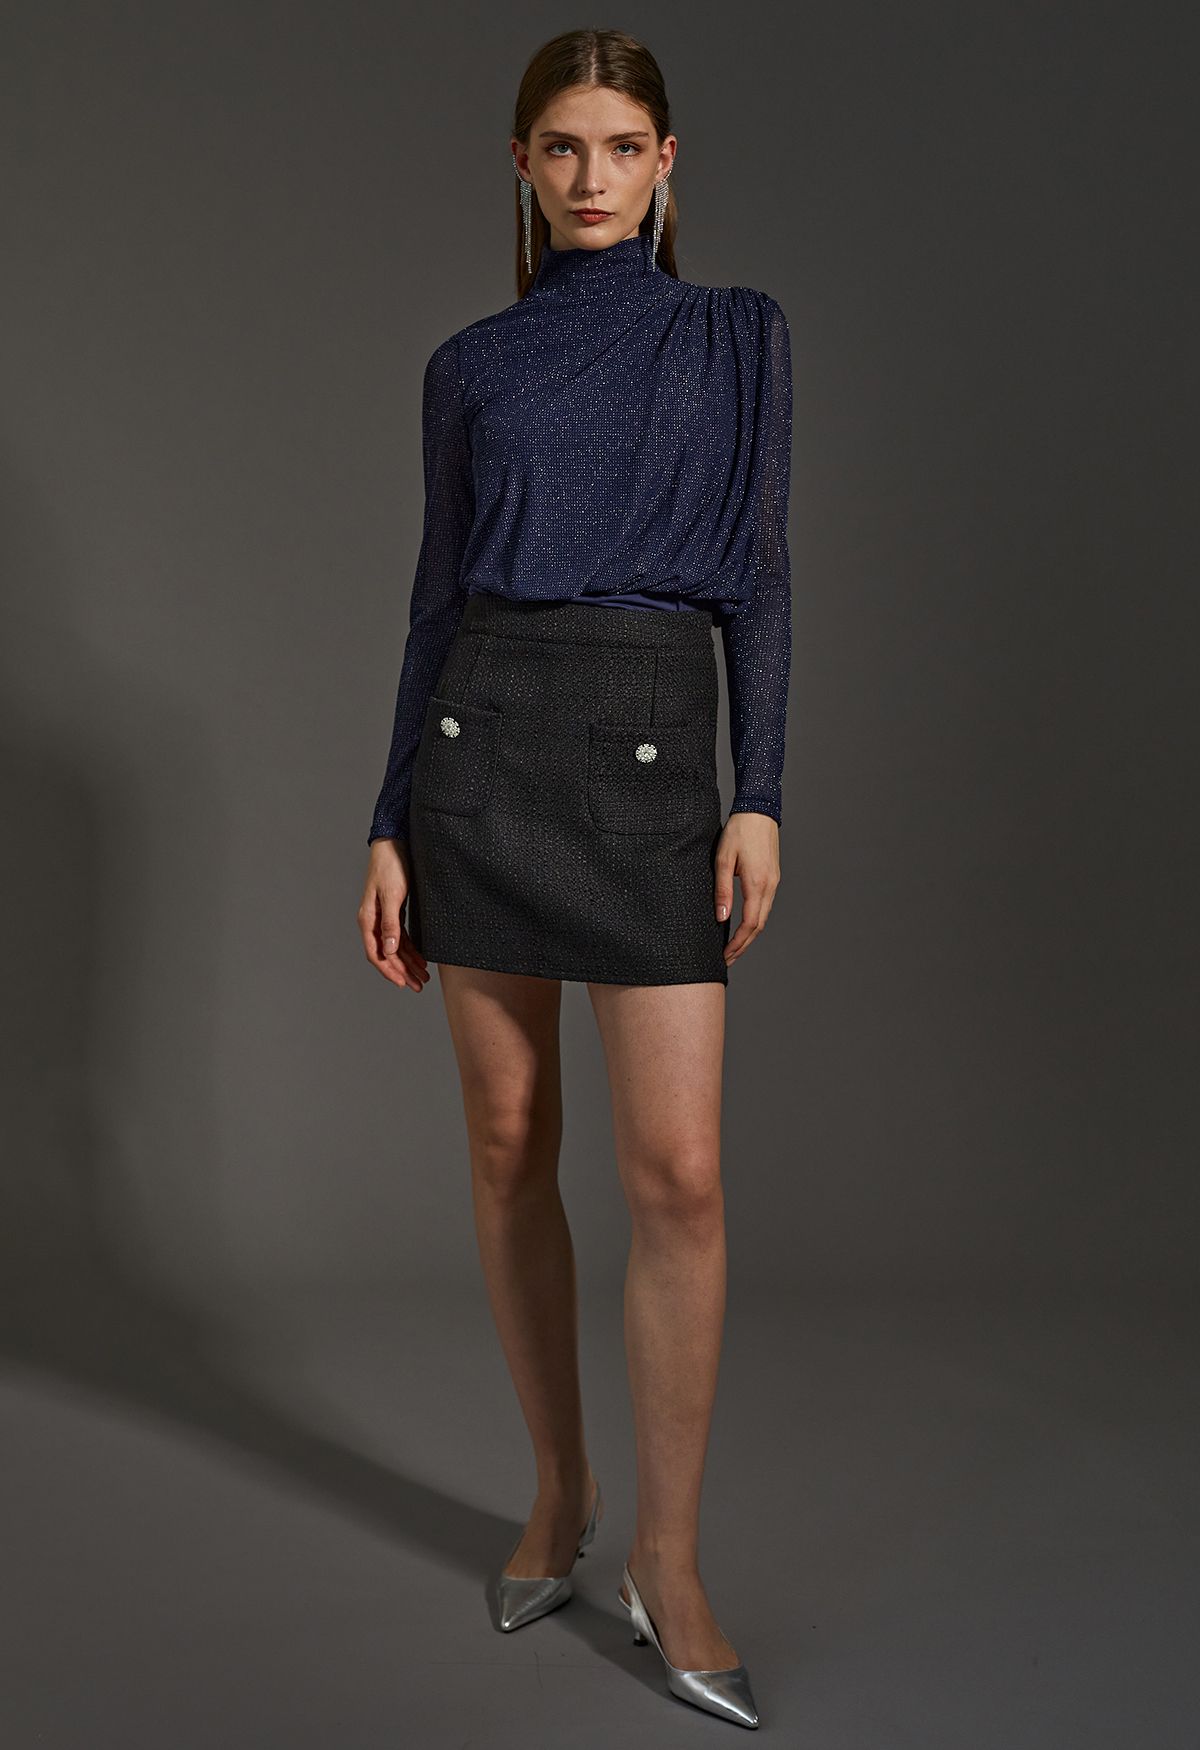 Gleam High Neck Spliced Ruched Top in Navy